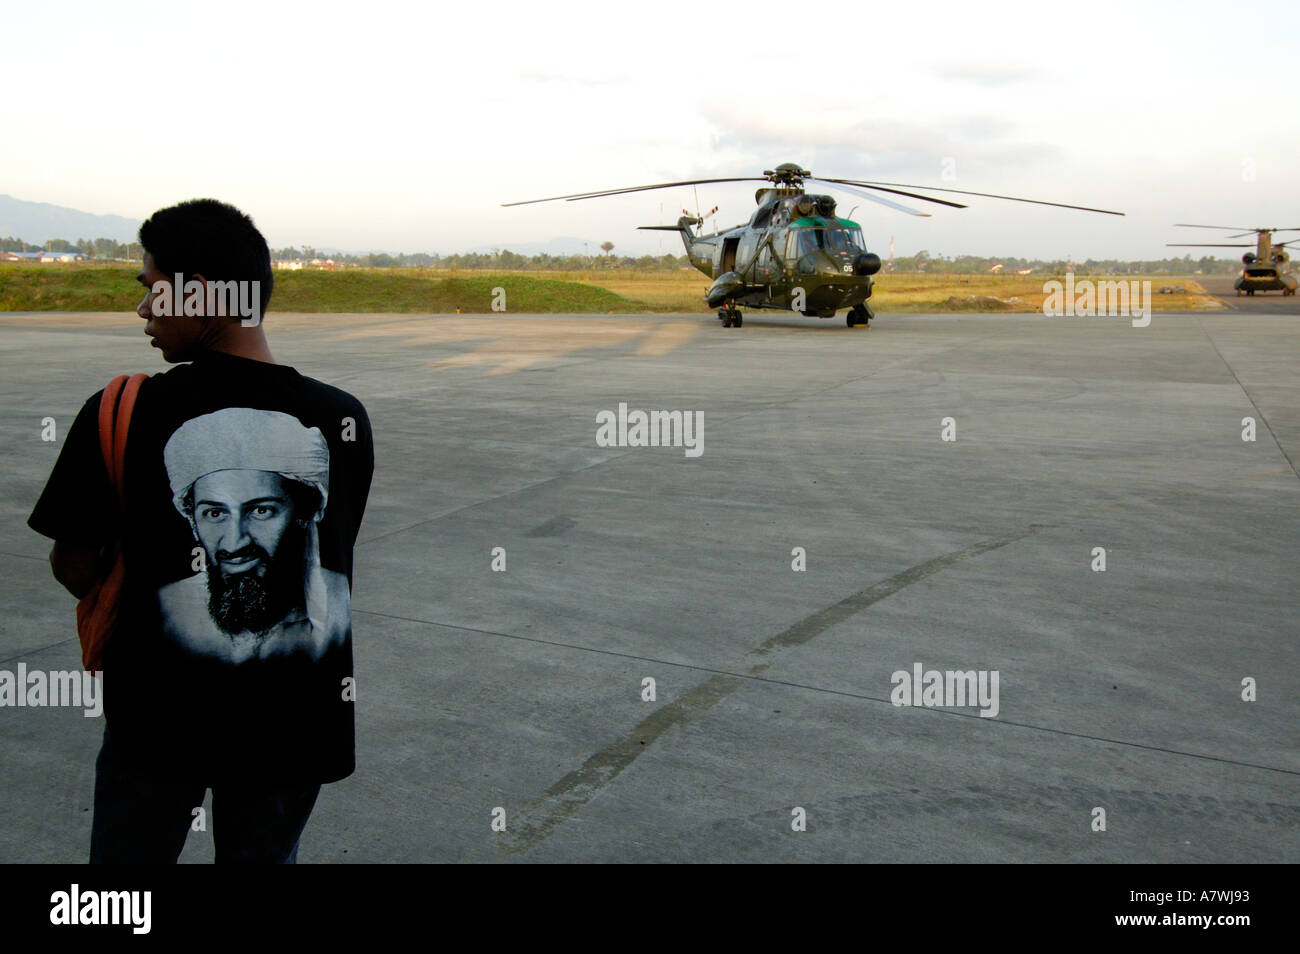 Indonesia Sumatra Banda Aceh Post Tsunami UN helicopters and Osama Bin Laden T shirt at the airport Stock Photo